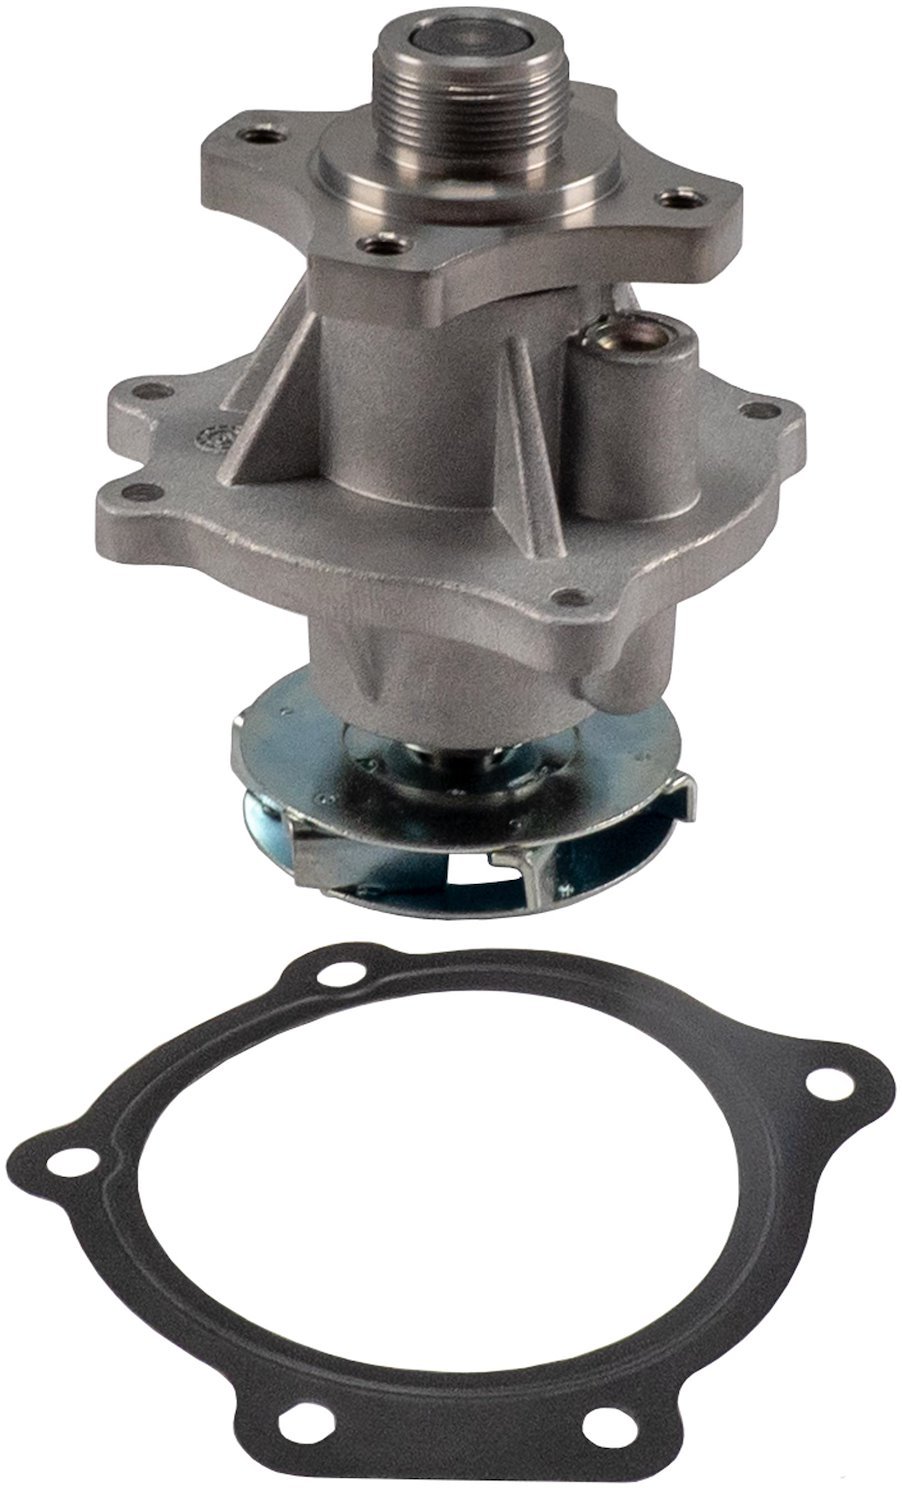 Water Pump Fits Select 2002-2012 GM 2.8/2.9/3.5/3.7/4.2L Engines